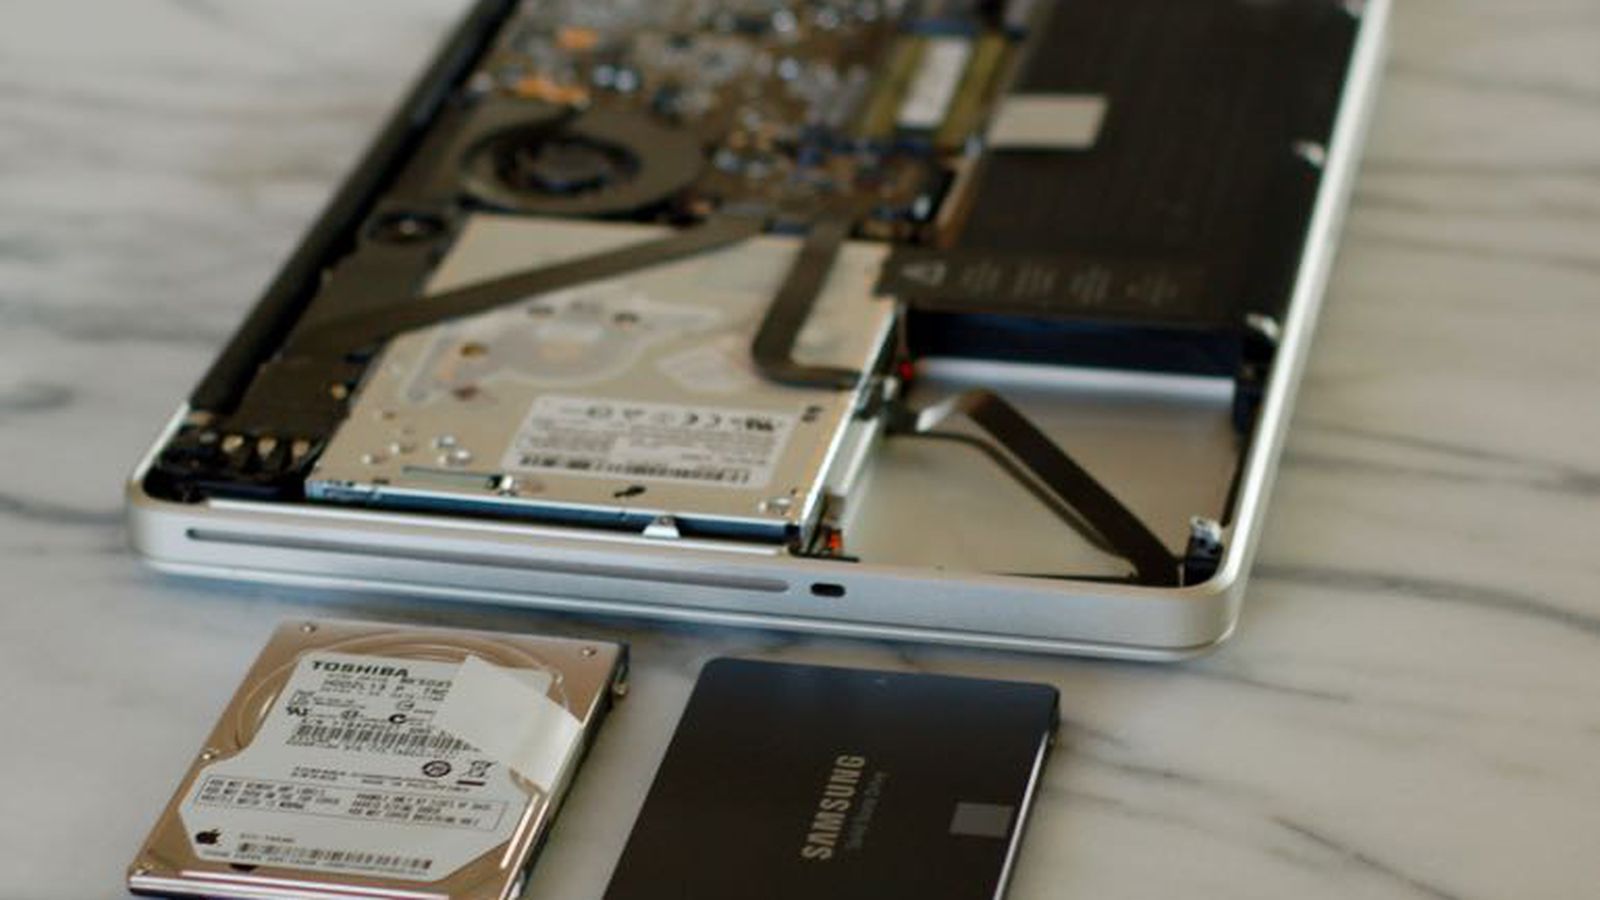 macbook pro solid state drive upgrade